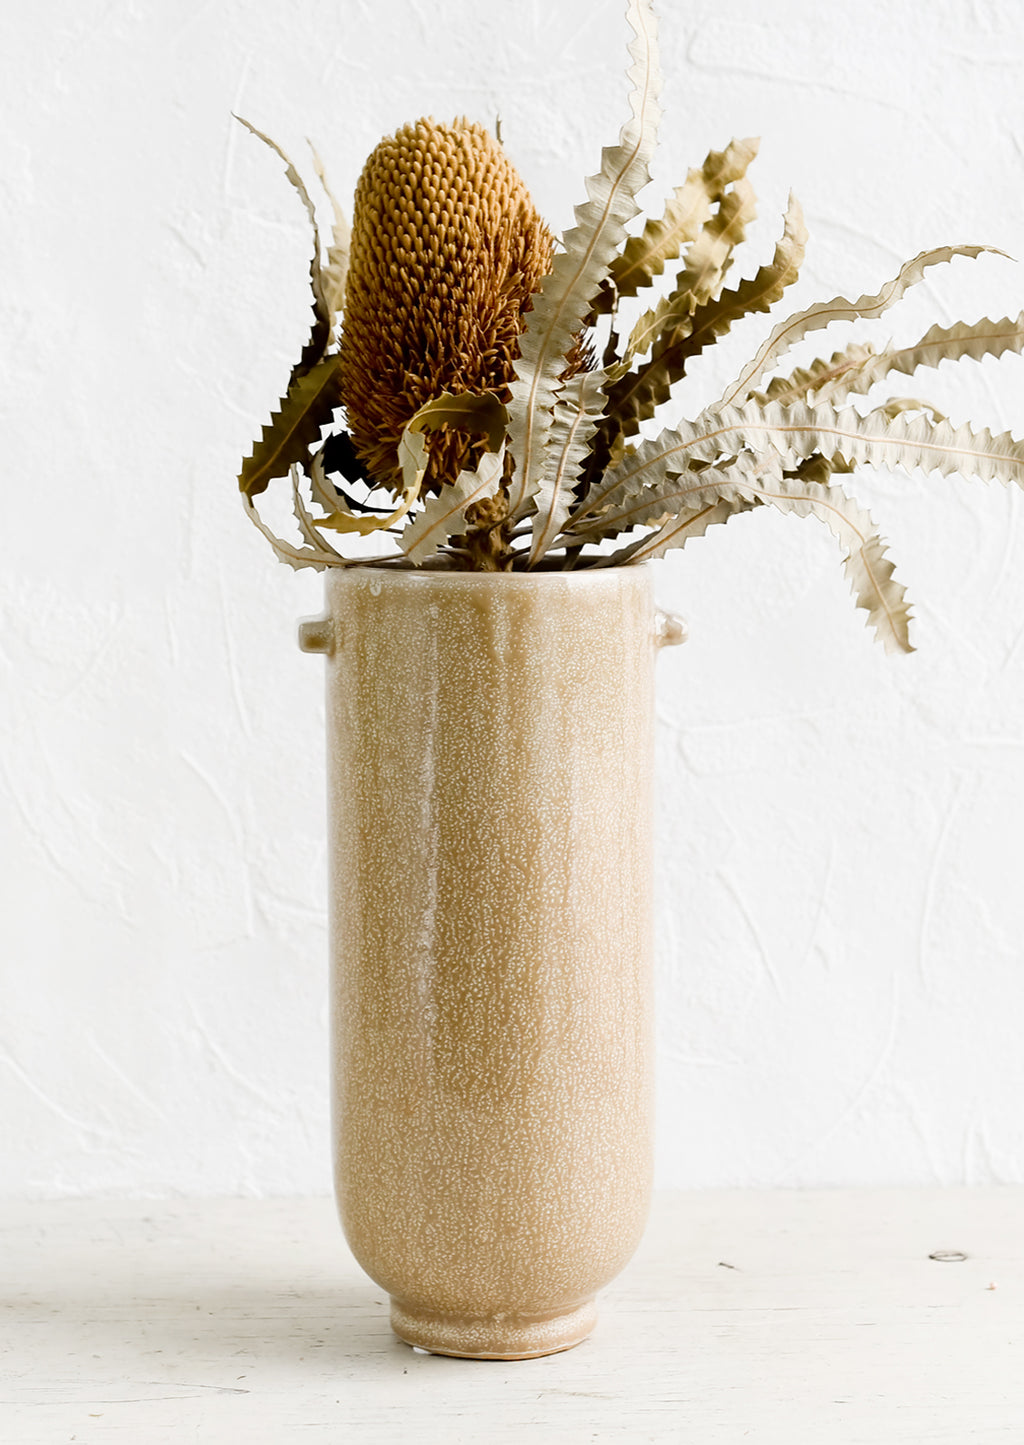 2: A tall brown ceramic vase with dried protea flower.